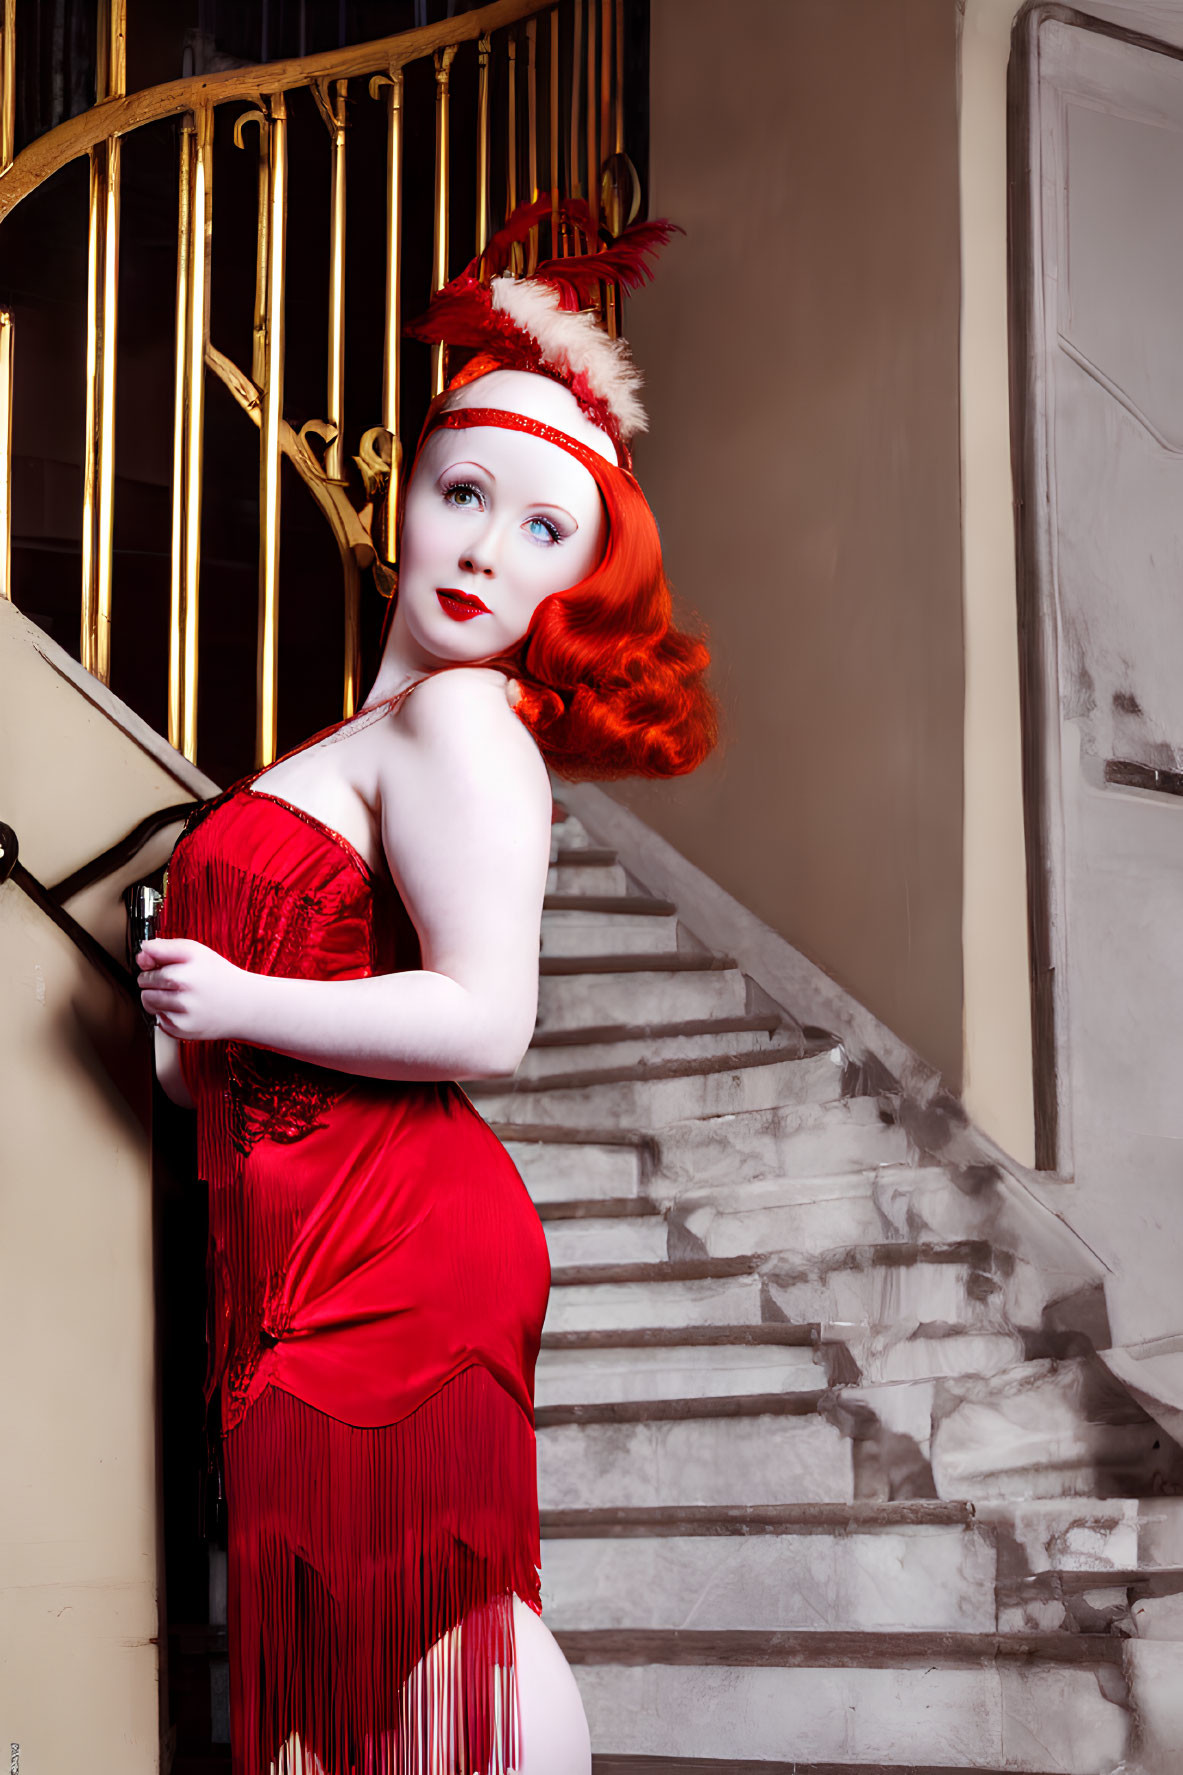 Vintage red flapper dress woman by staircase with dramatic expression